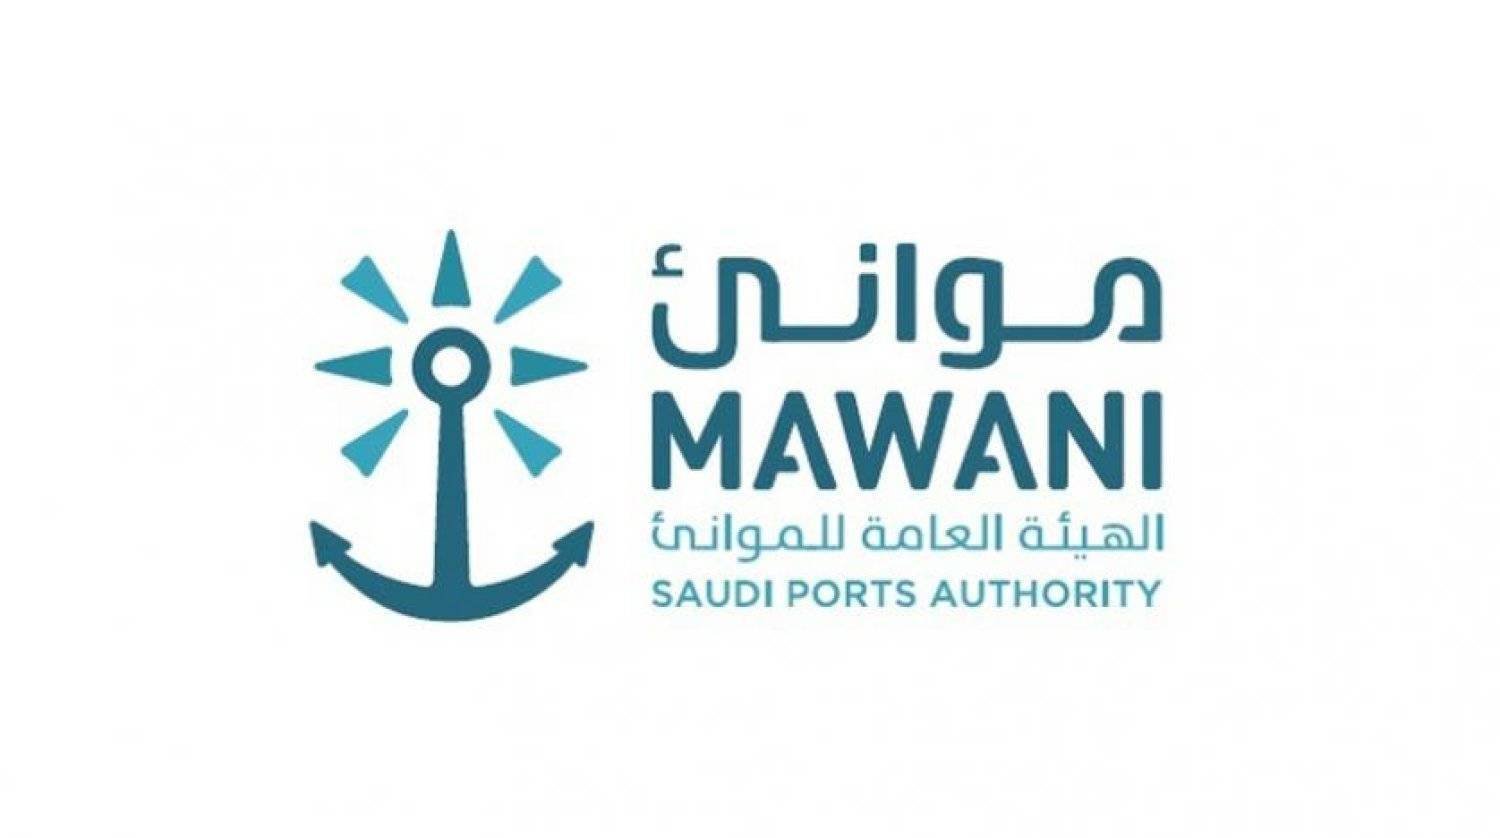 Mawani launched the Levante Express service by Mediterranean Shipping Company (MSC) at the Jeddah Islamic Port to strengthen connectivity to ports across both northern and southern Europe. (SPA)